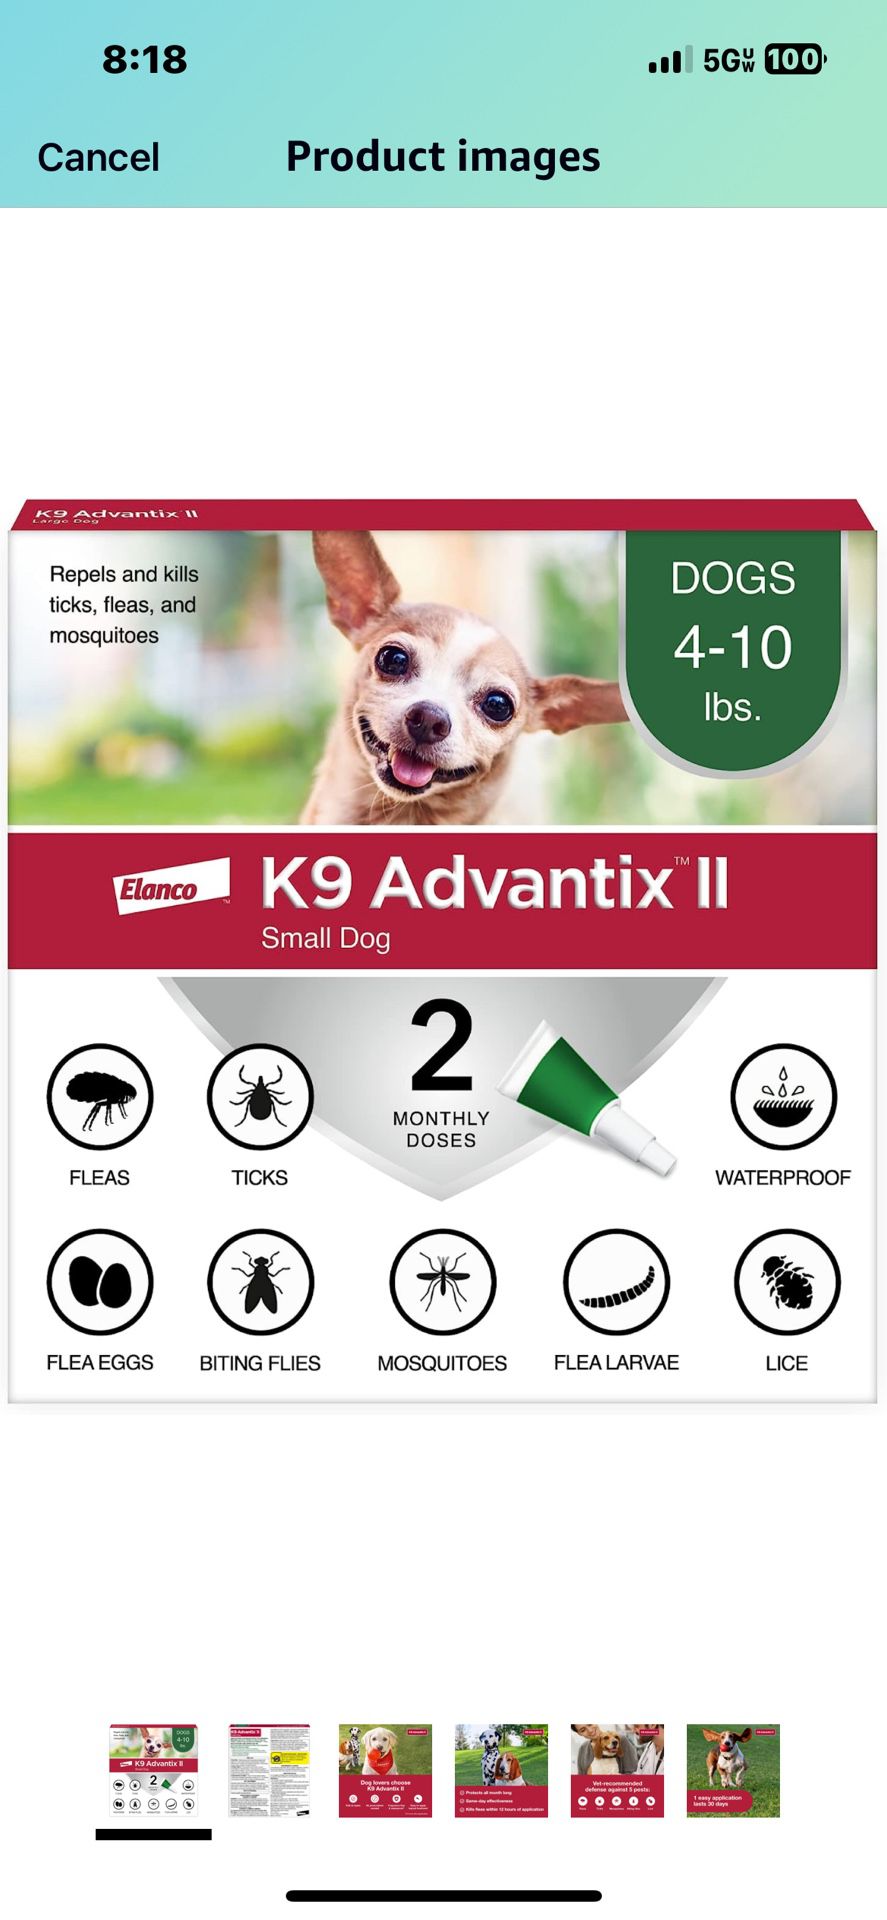 K9 Advantix II Small Dog Vet-Recommended Flea, Tick & Mosquito Treatment & Prevention | Dogs 4-10 lbs. | 2-Mo Supply